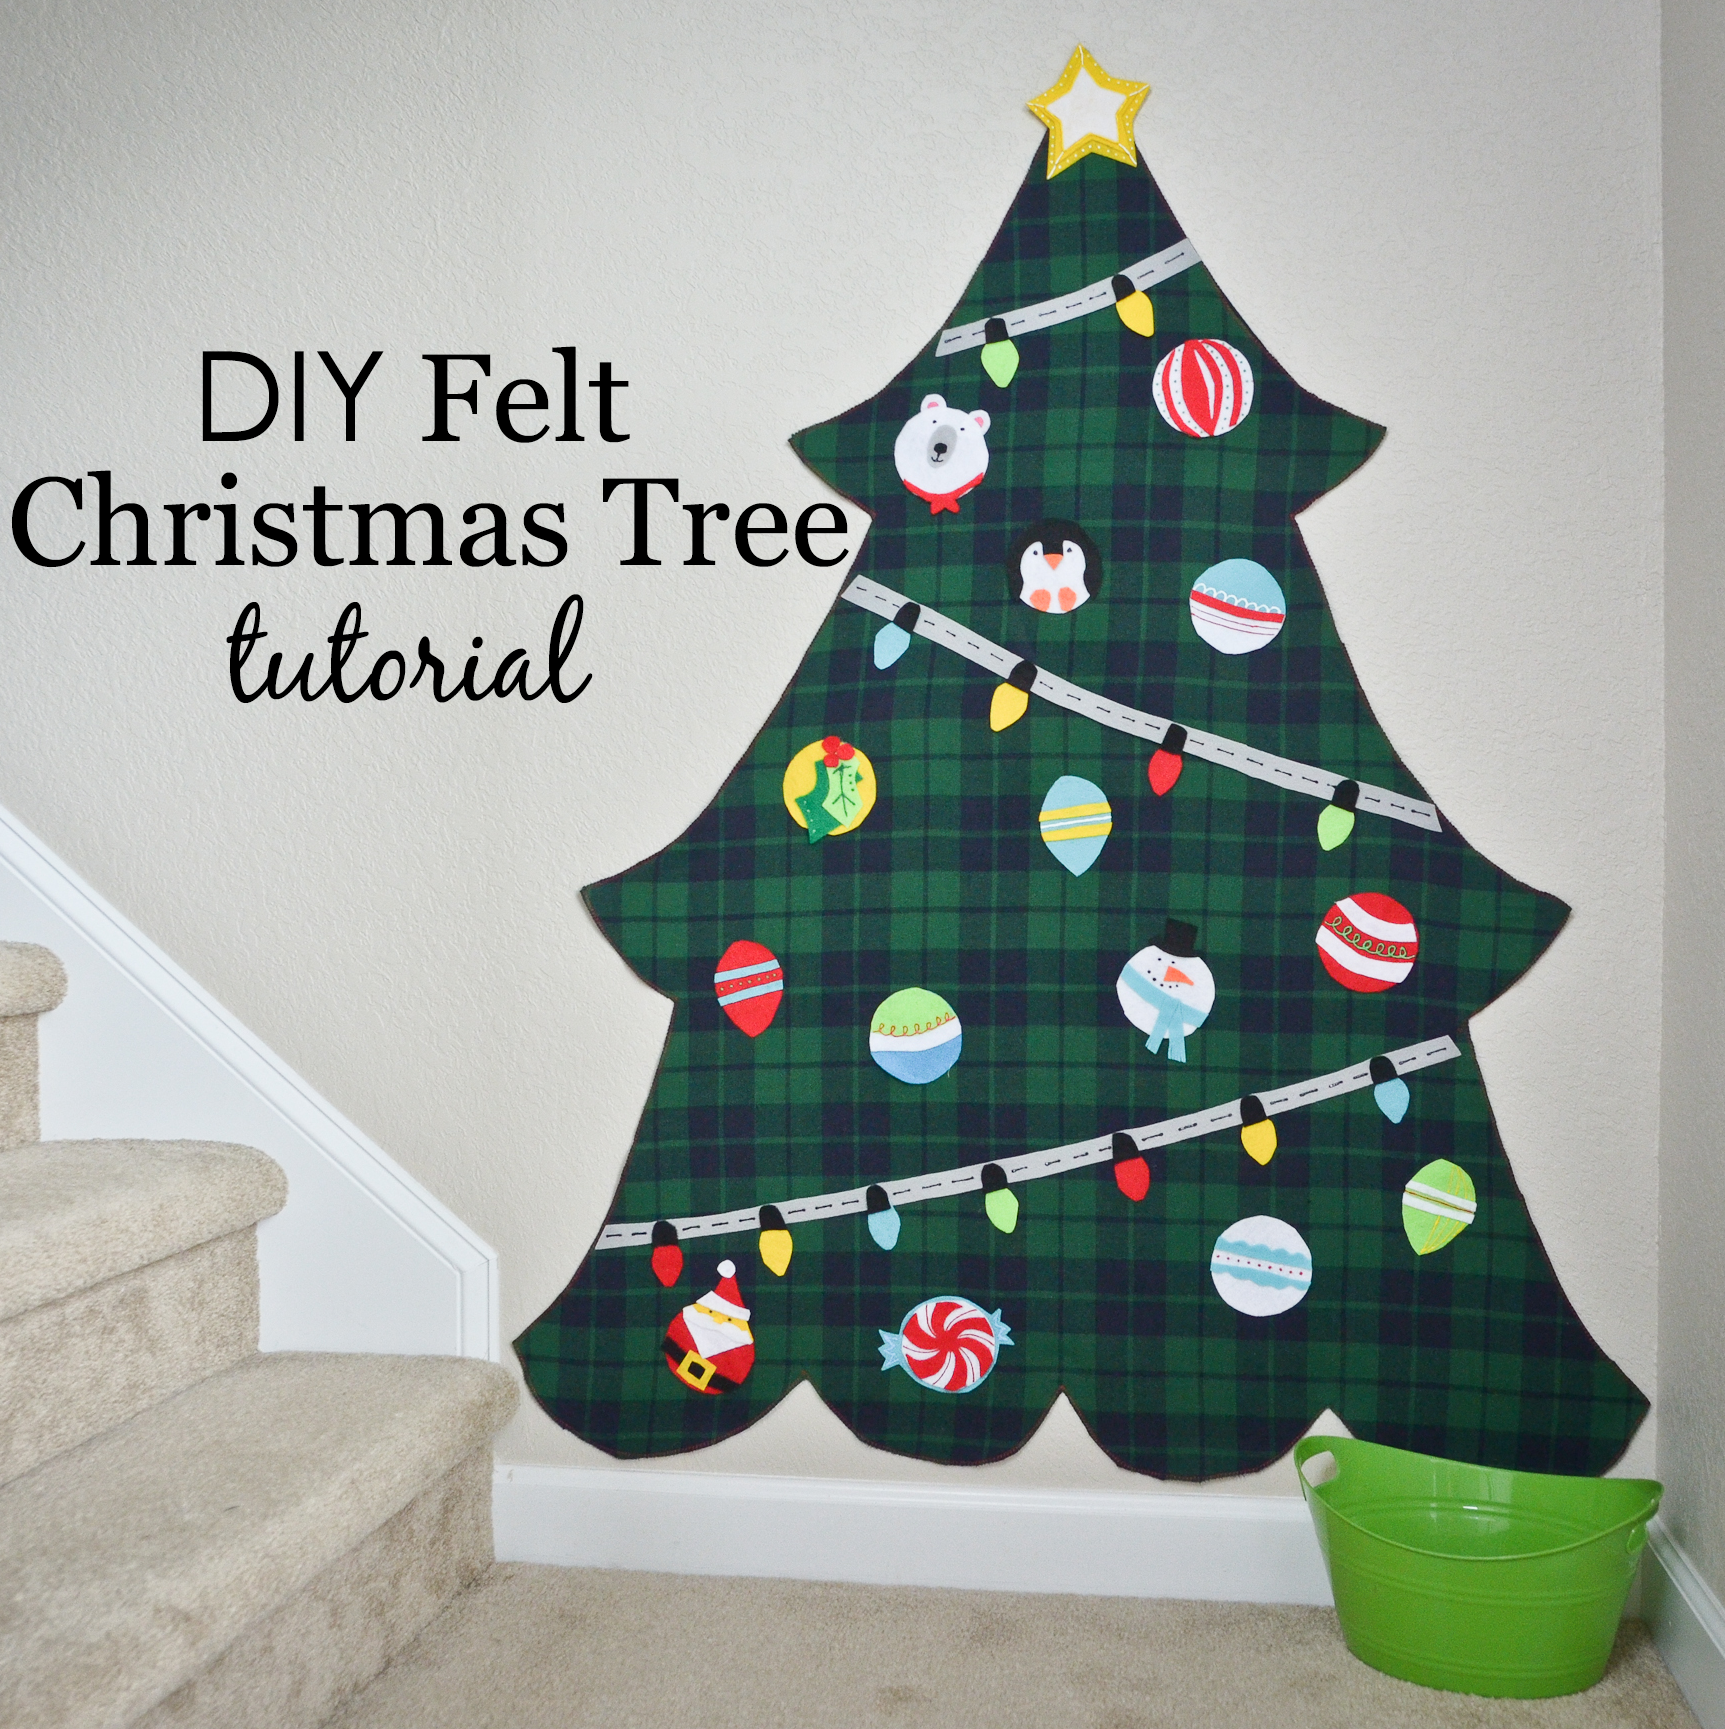 Children Felt,Felt Tree,Christmas Tree with 45pcs Ornament,Green Christmas Tree,DIY Felt Christmas Tree Education Gift,Wall Hanging Decoration for Kids Children,Eco Friendly,Colorful Christmas